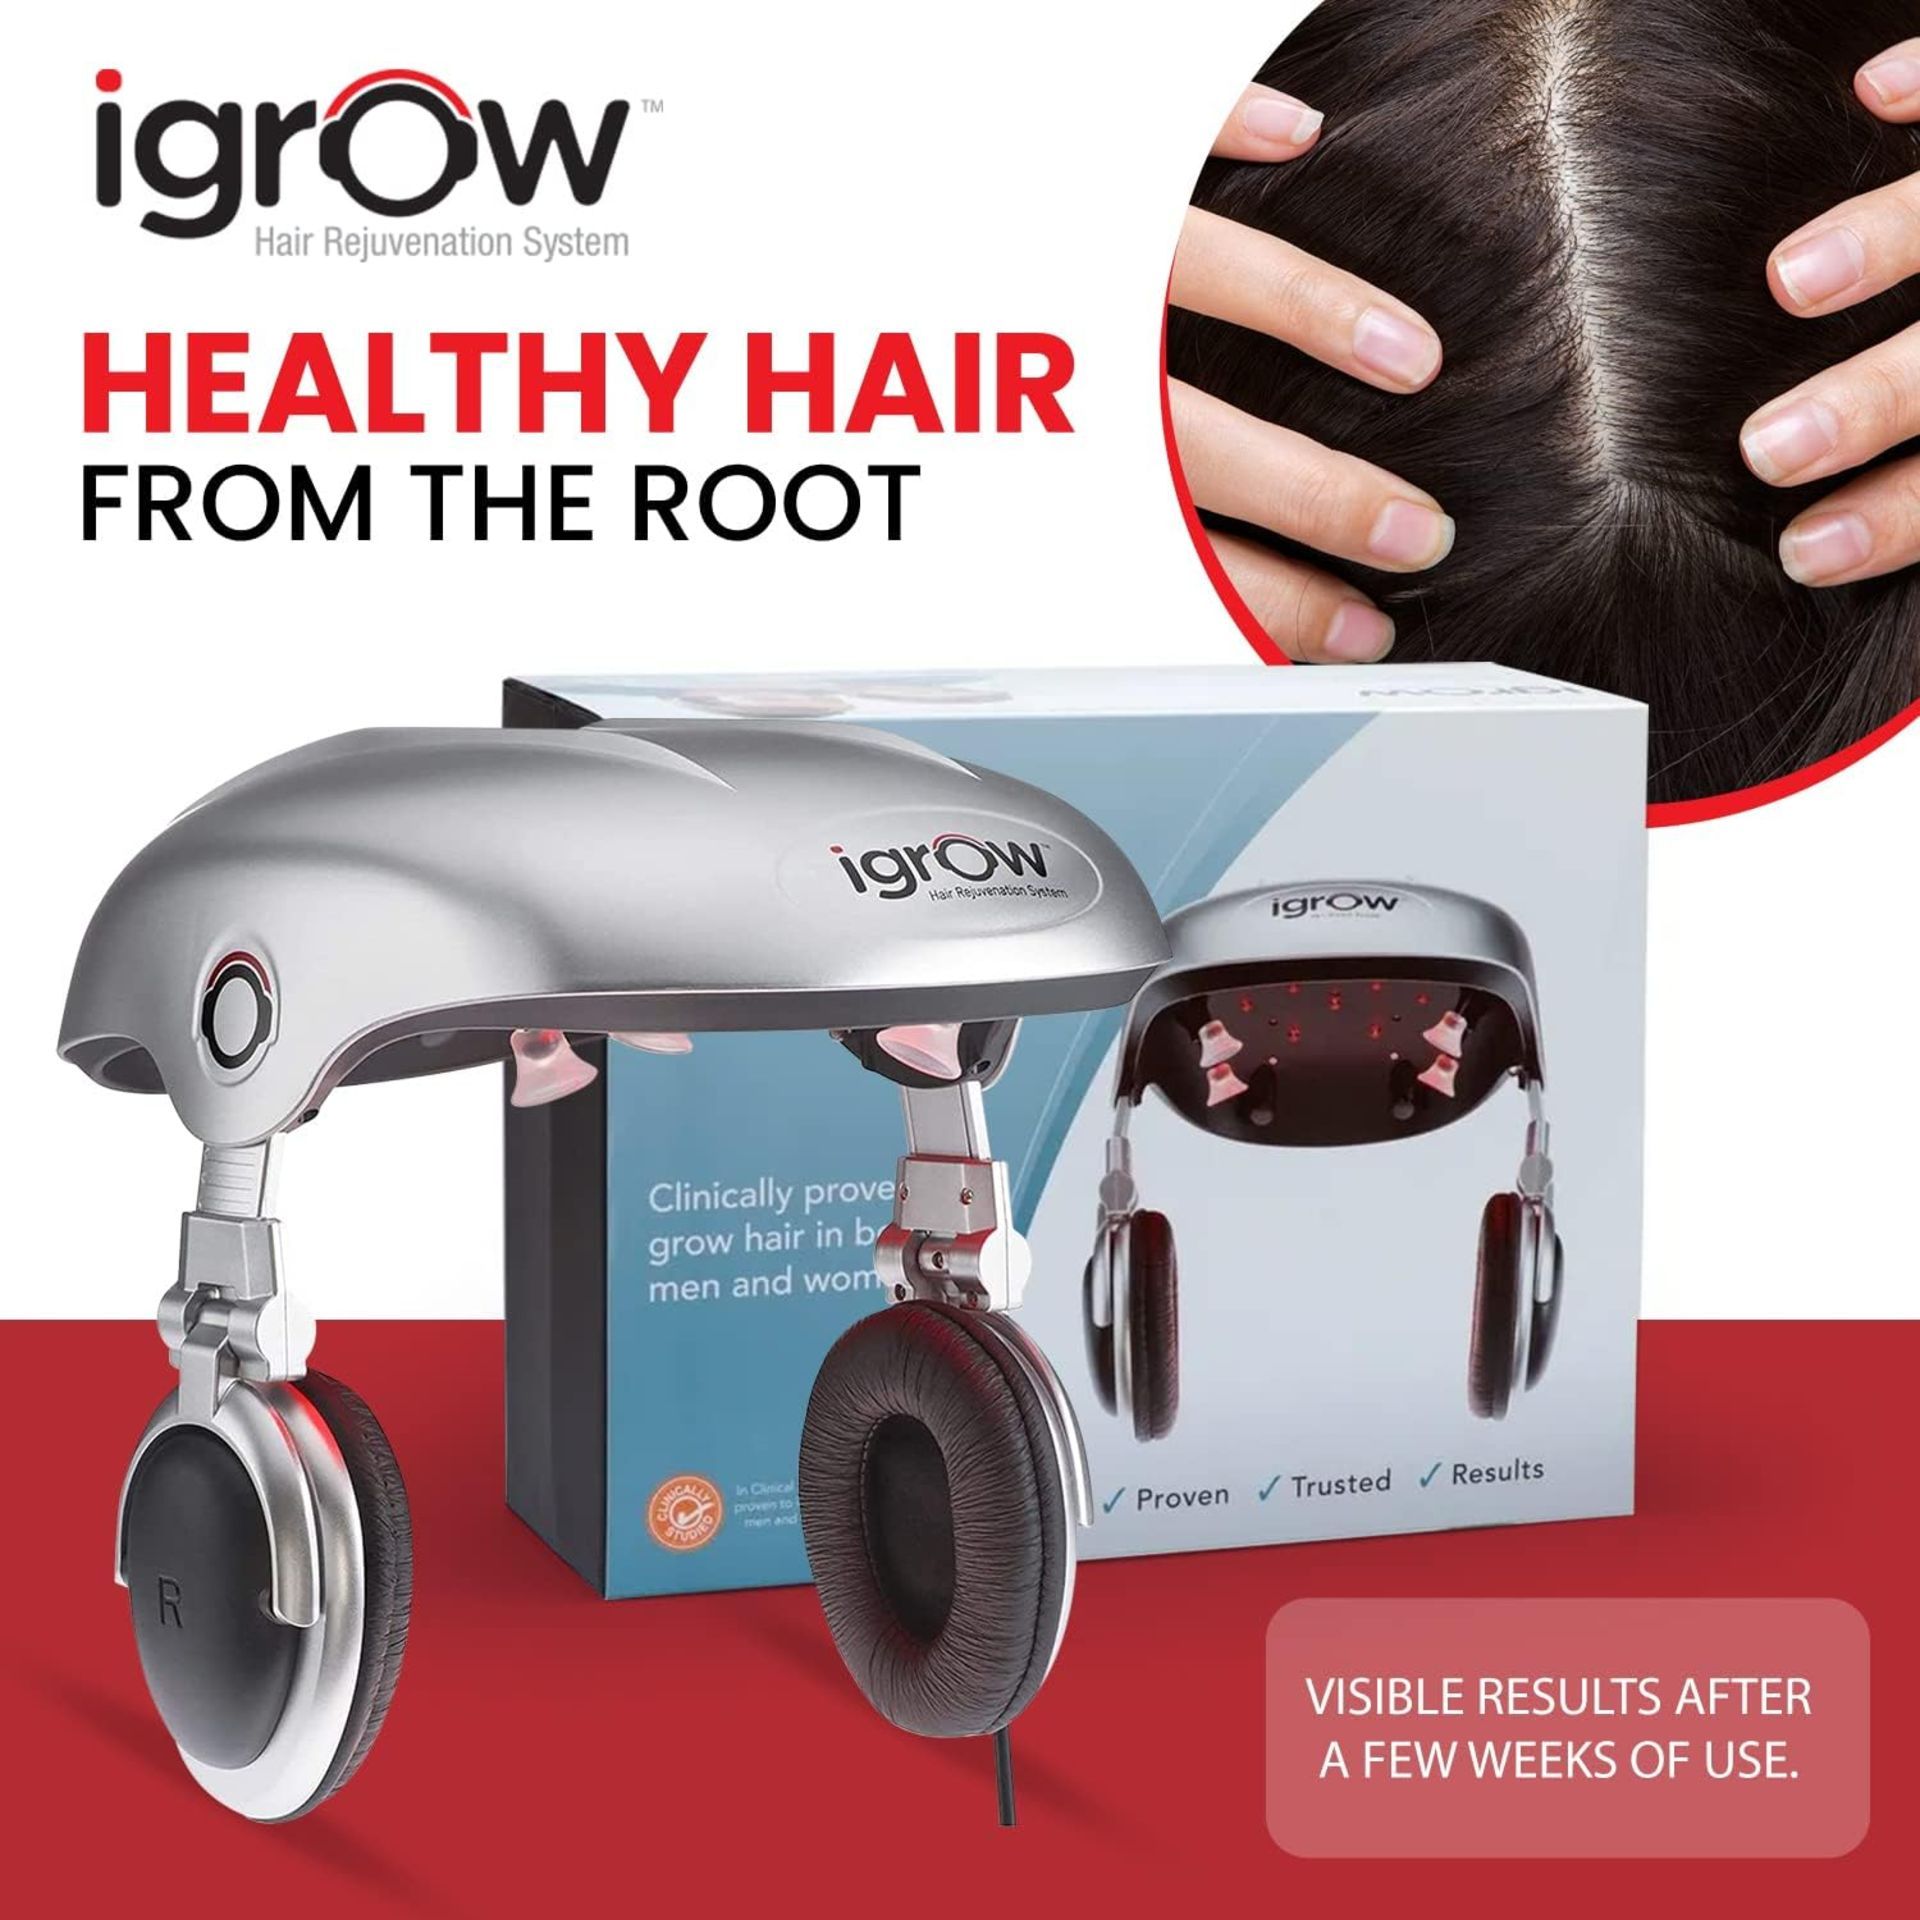 Brand New iGrow Professional Laser Hair Growth System R13-14 - FDA Cleared Laser Cap Hair Growth for - Image 3 of 5